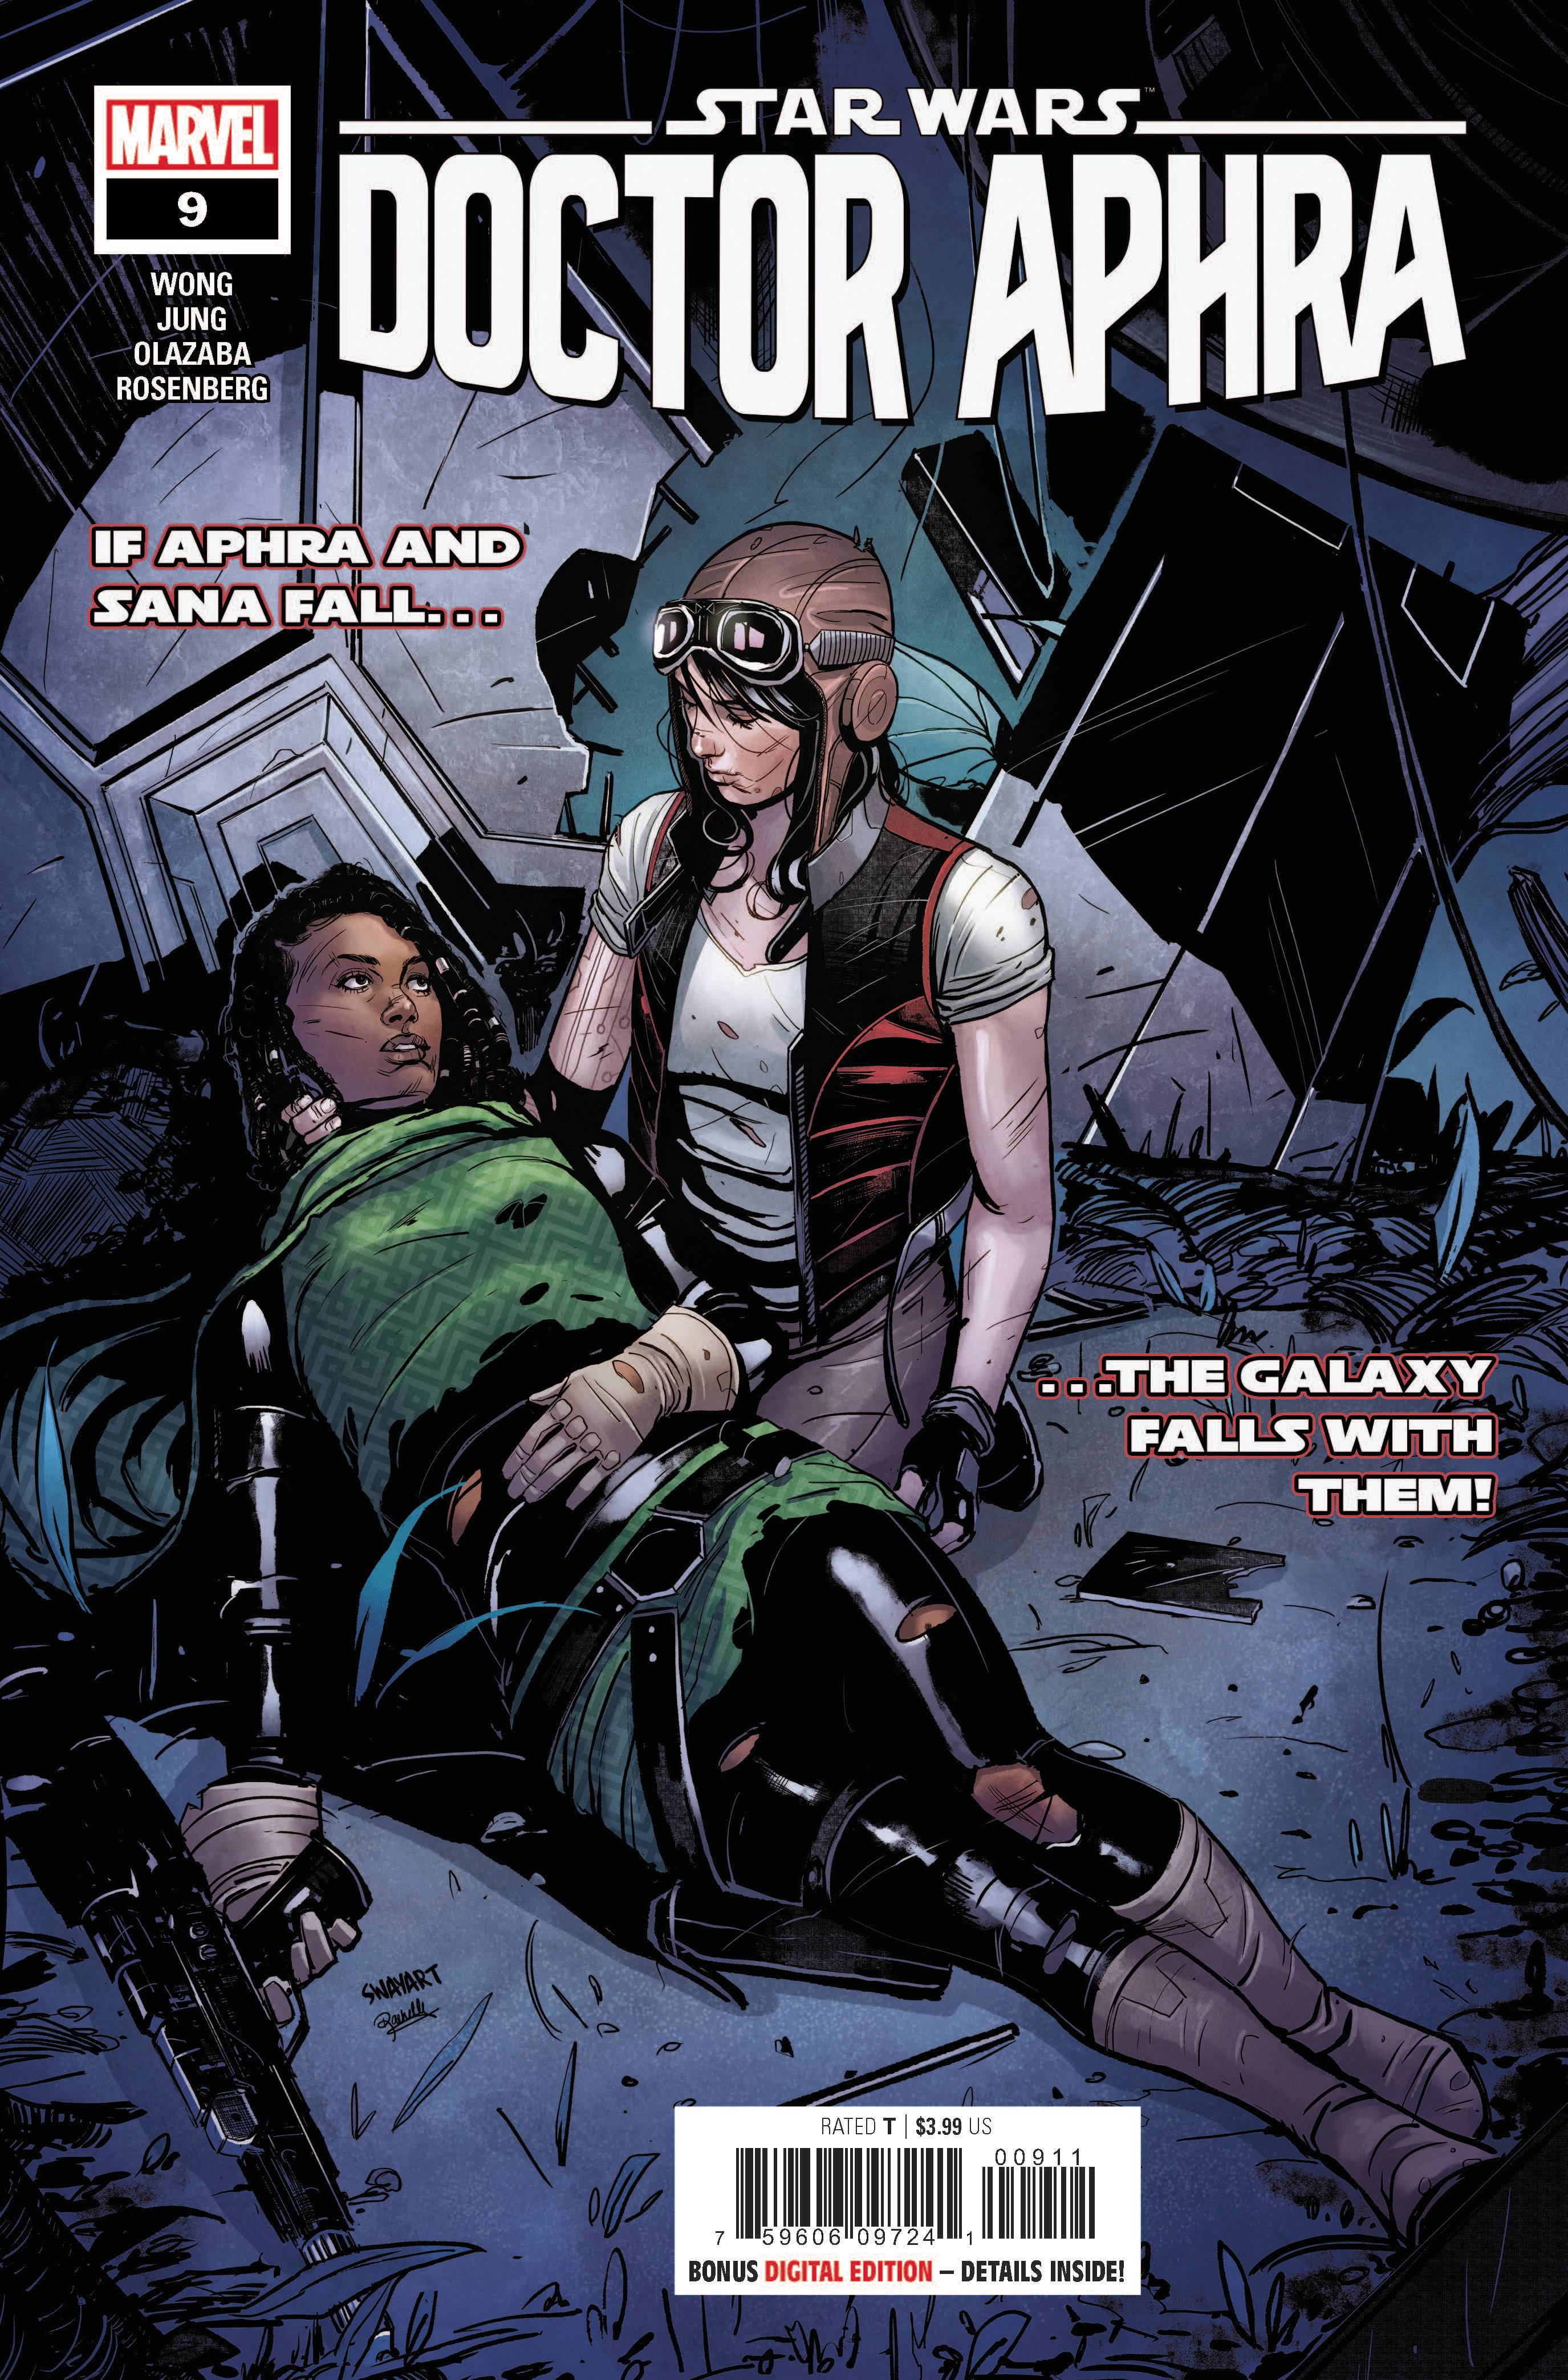 STAR WARS DOCTOR APHRA #9 | Game Master's Emporium (The New GME)